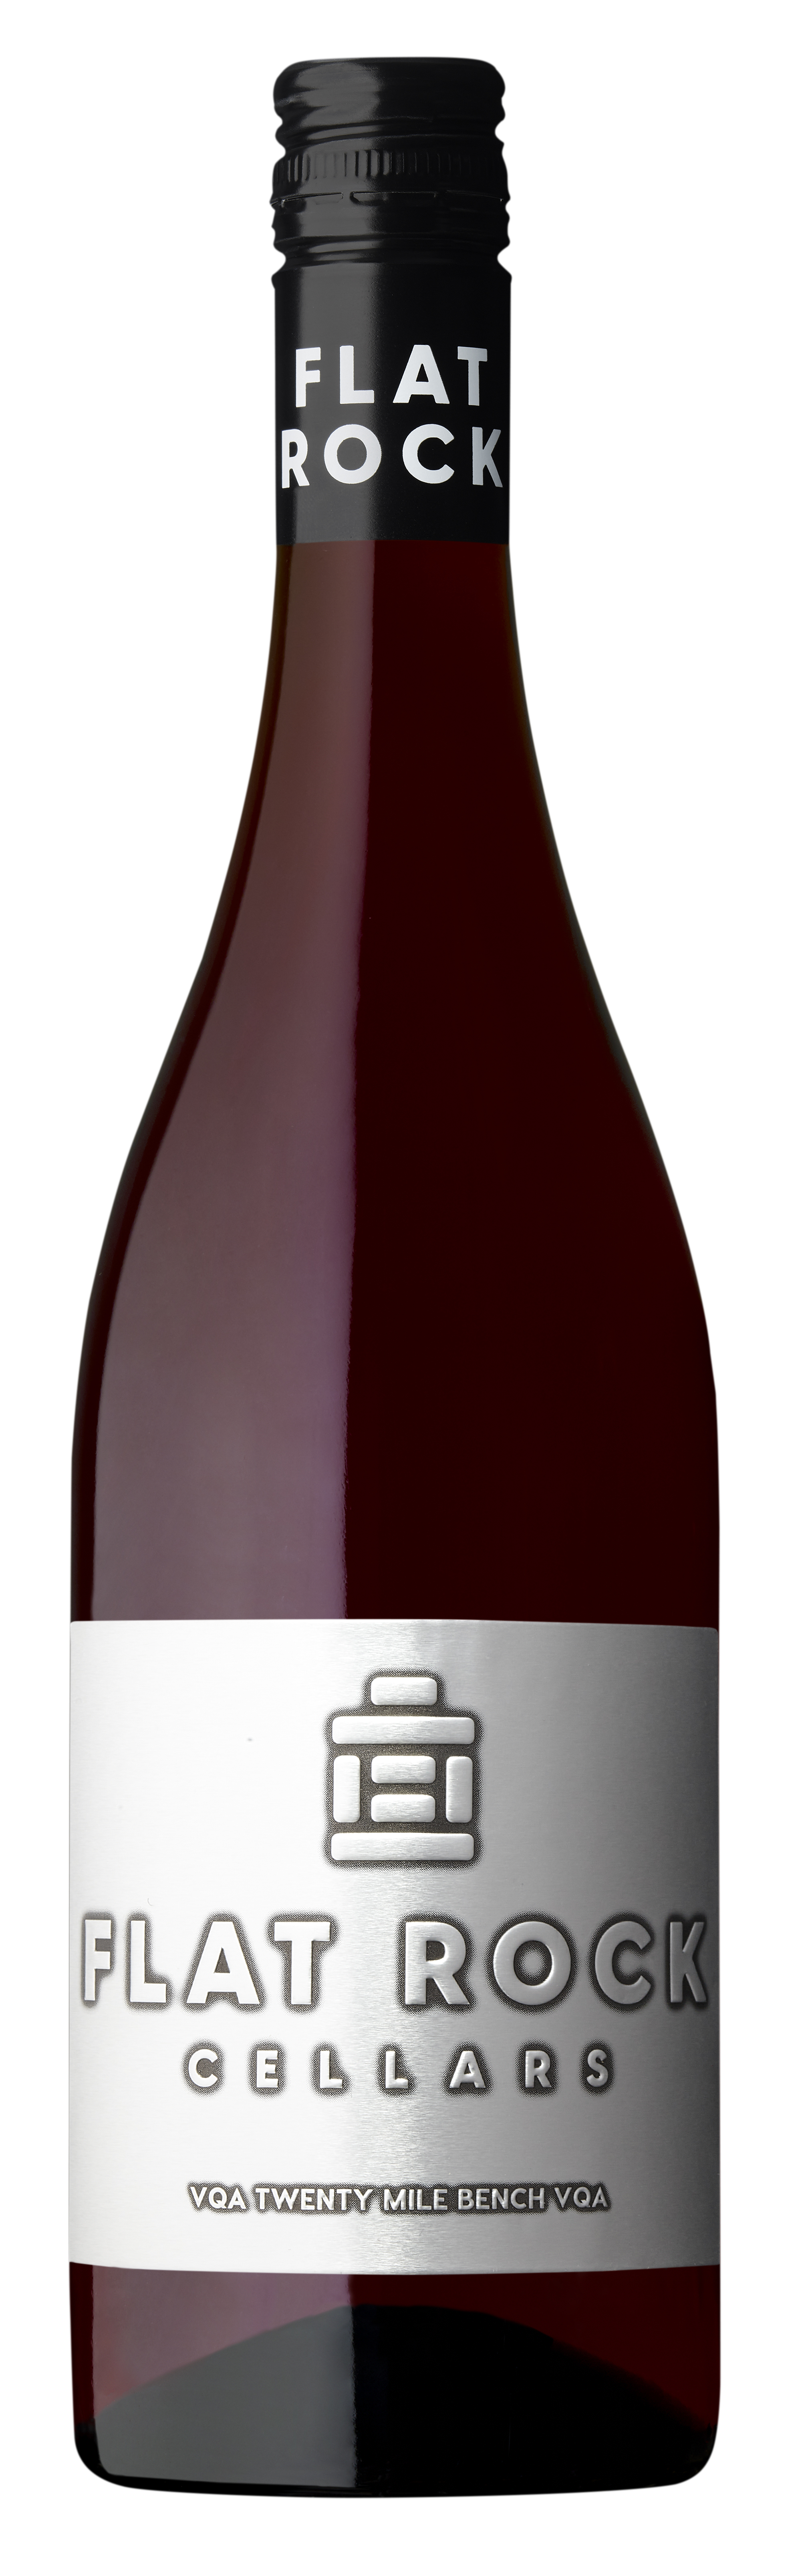 Product Image for 2020 Hexa Pinot Noir 